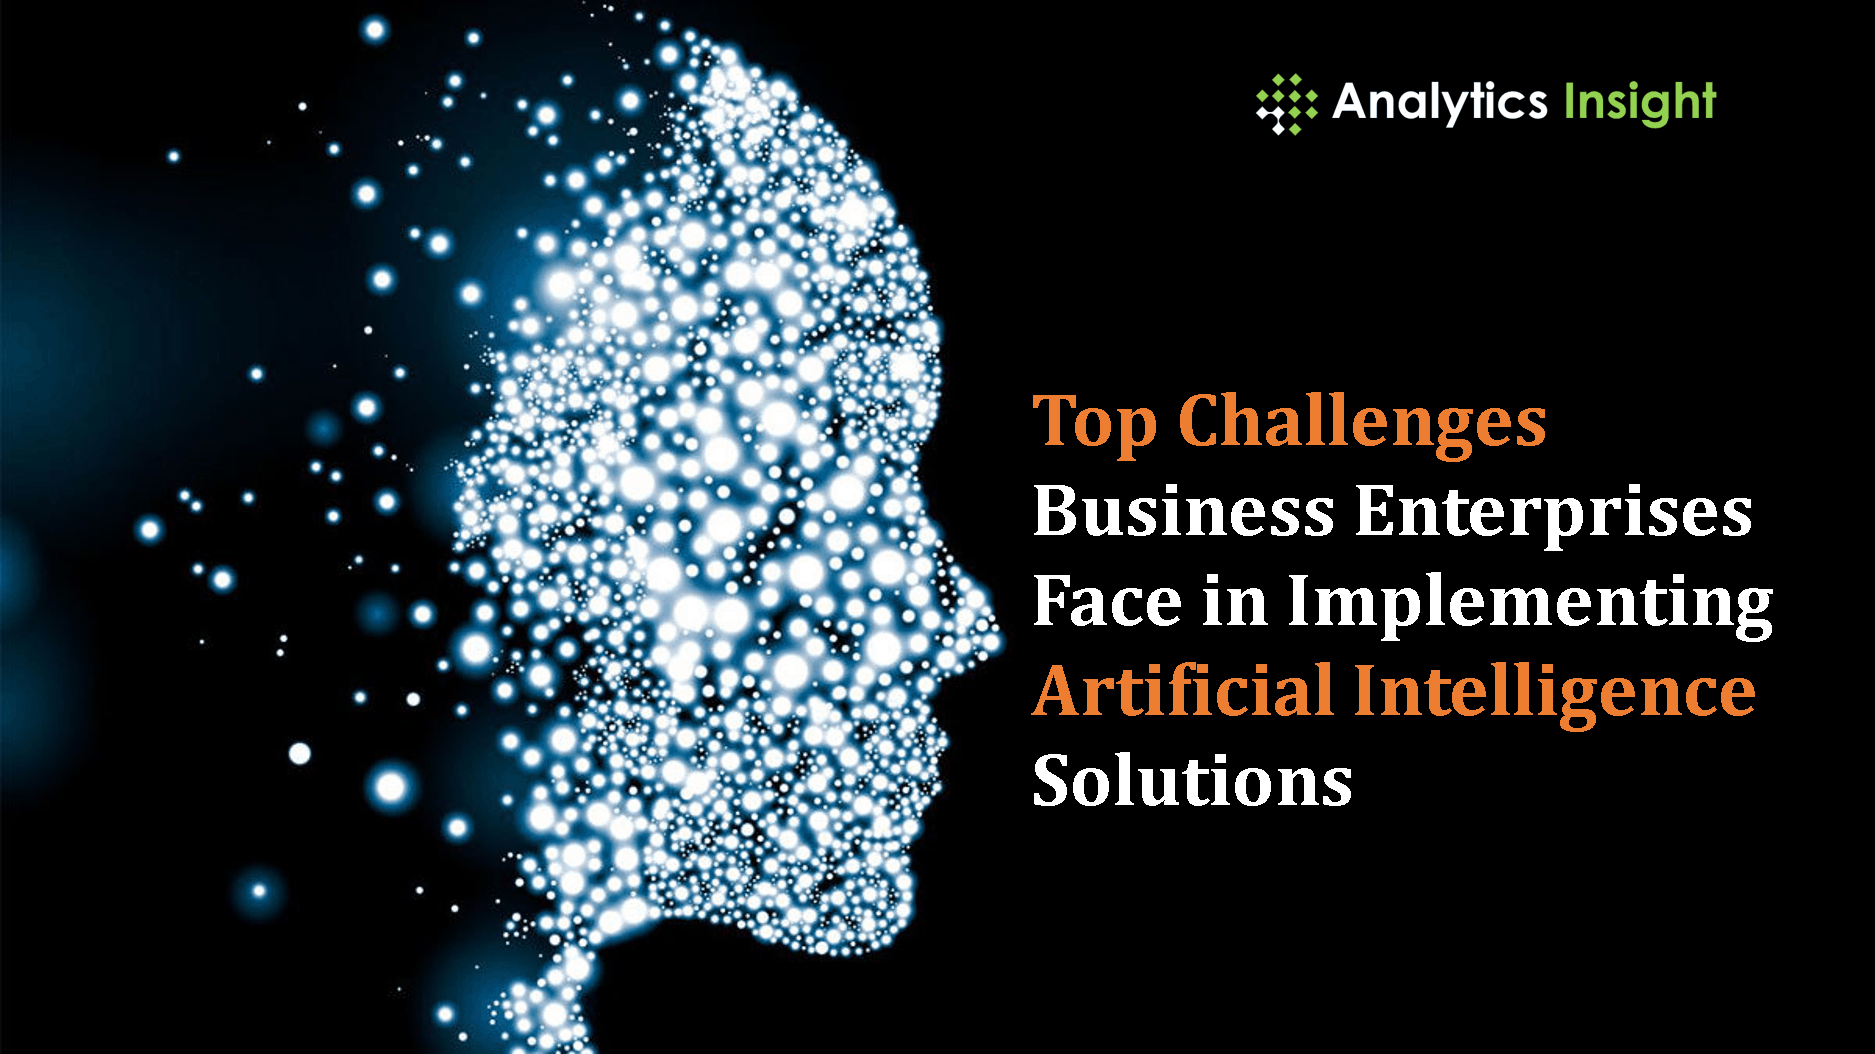 What challenges do companies face when implementing AI?